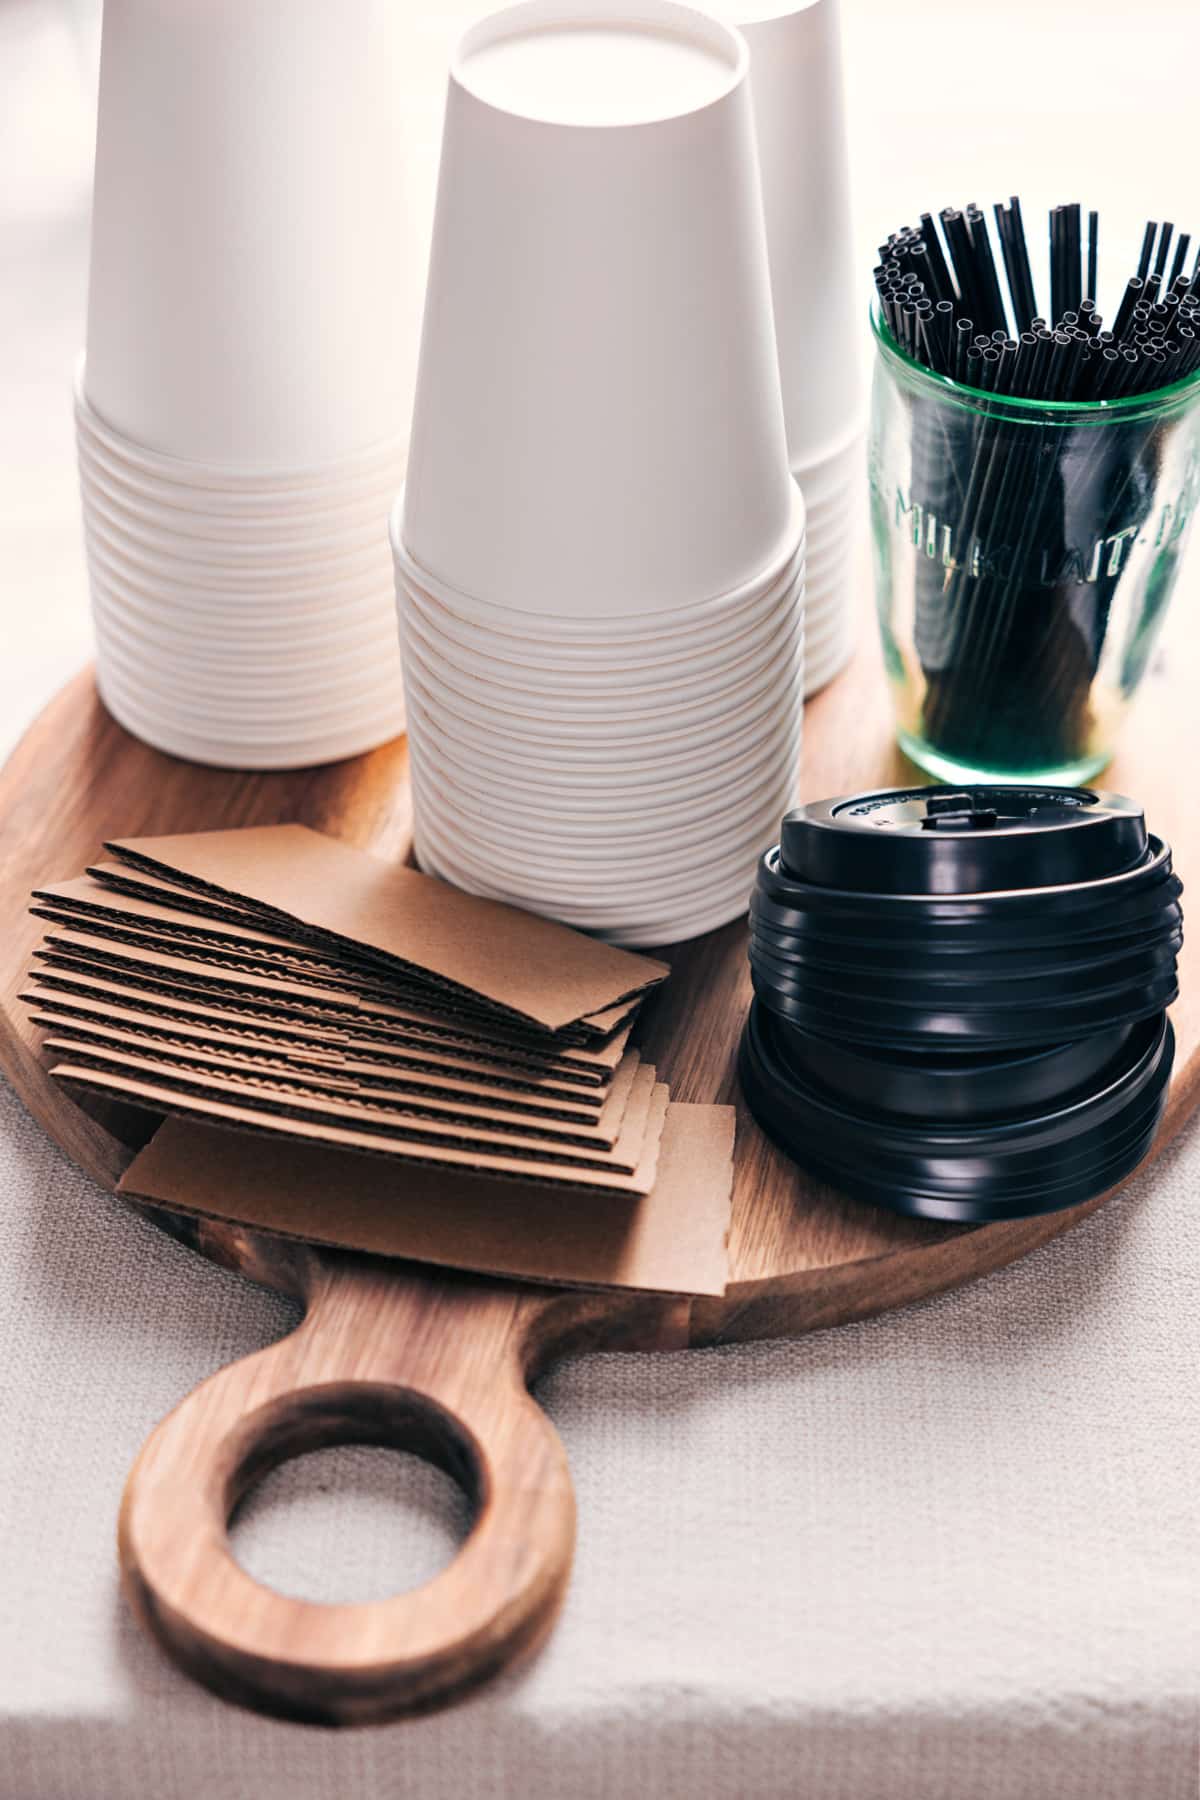 Array of hot chocolate cups with lids alongside a selection of straws displayed on a board.